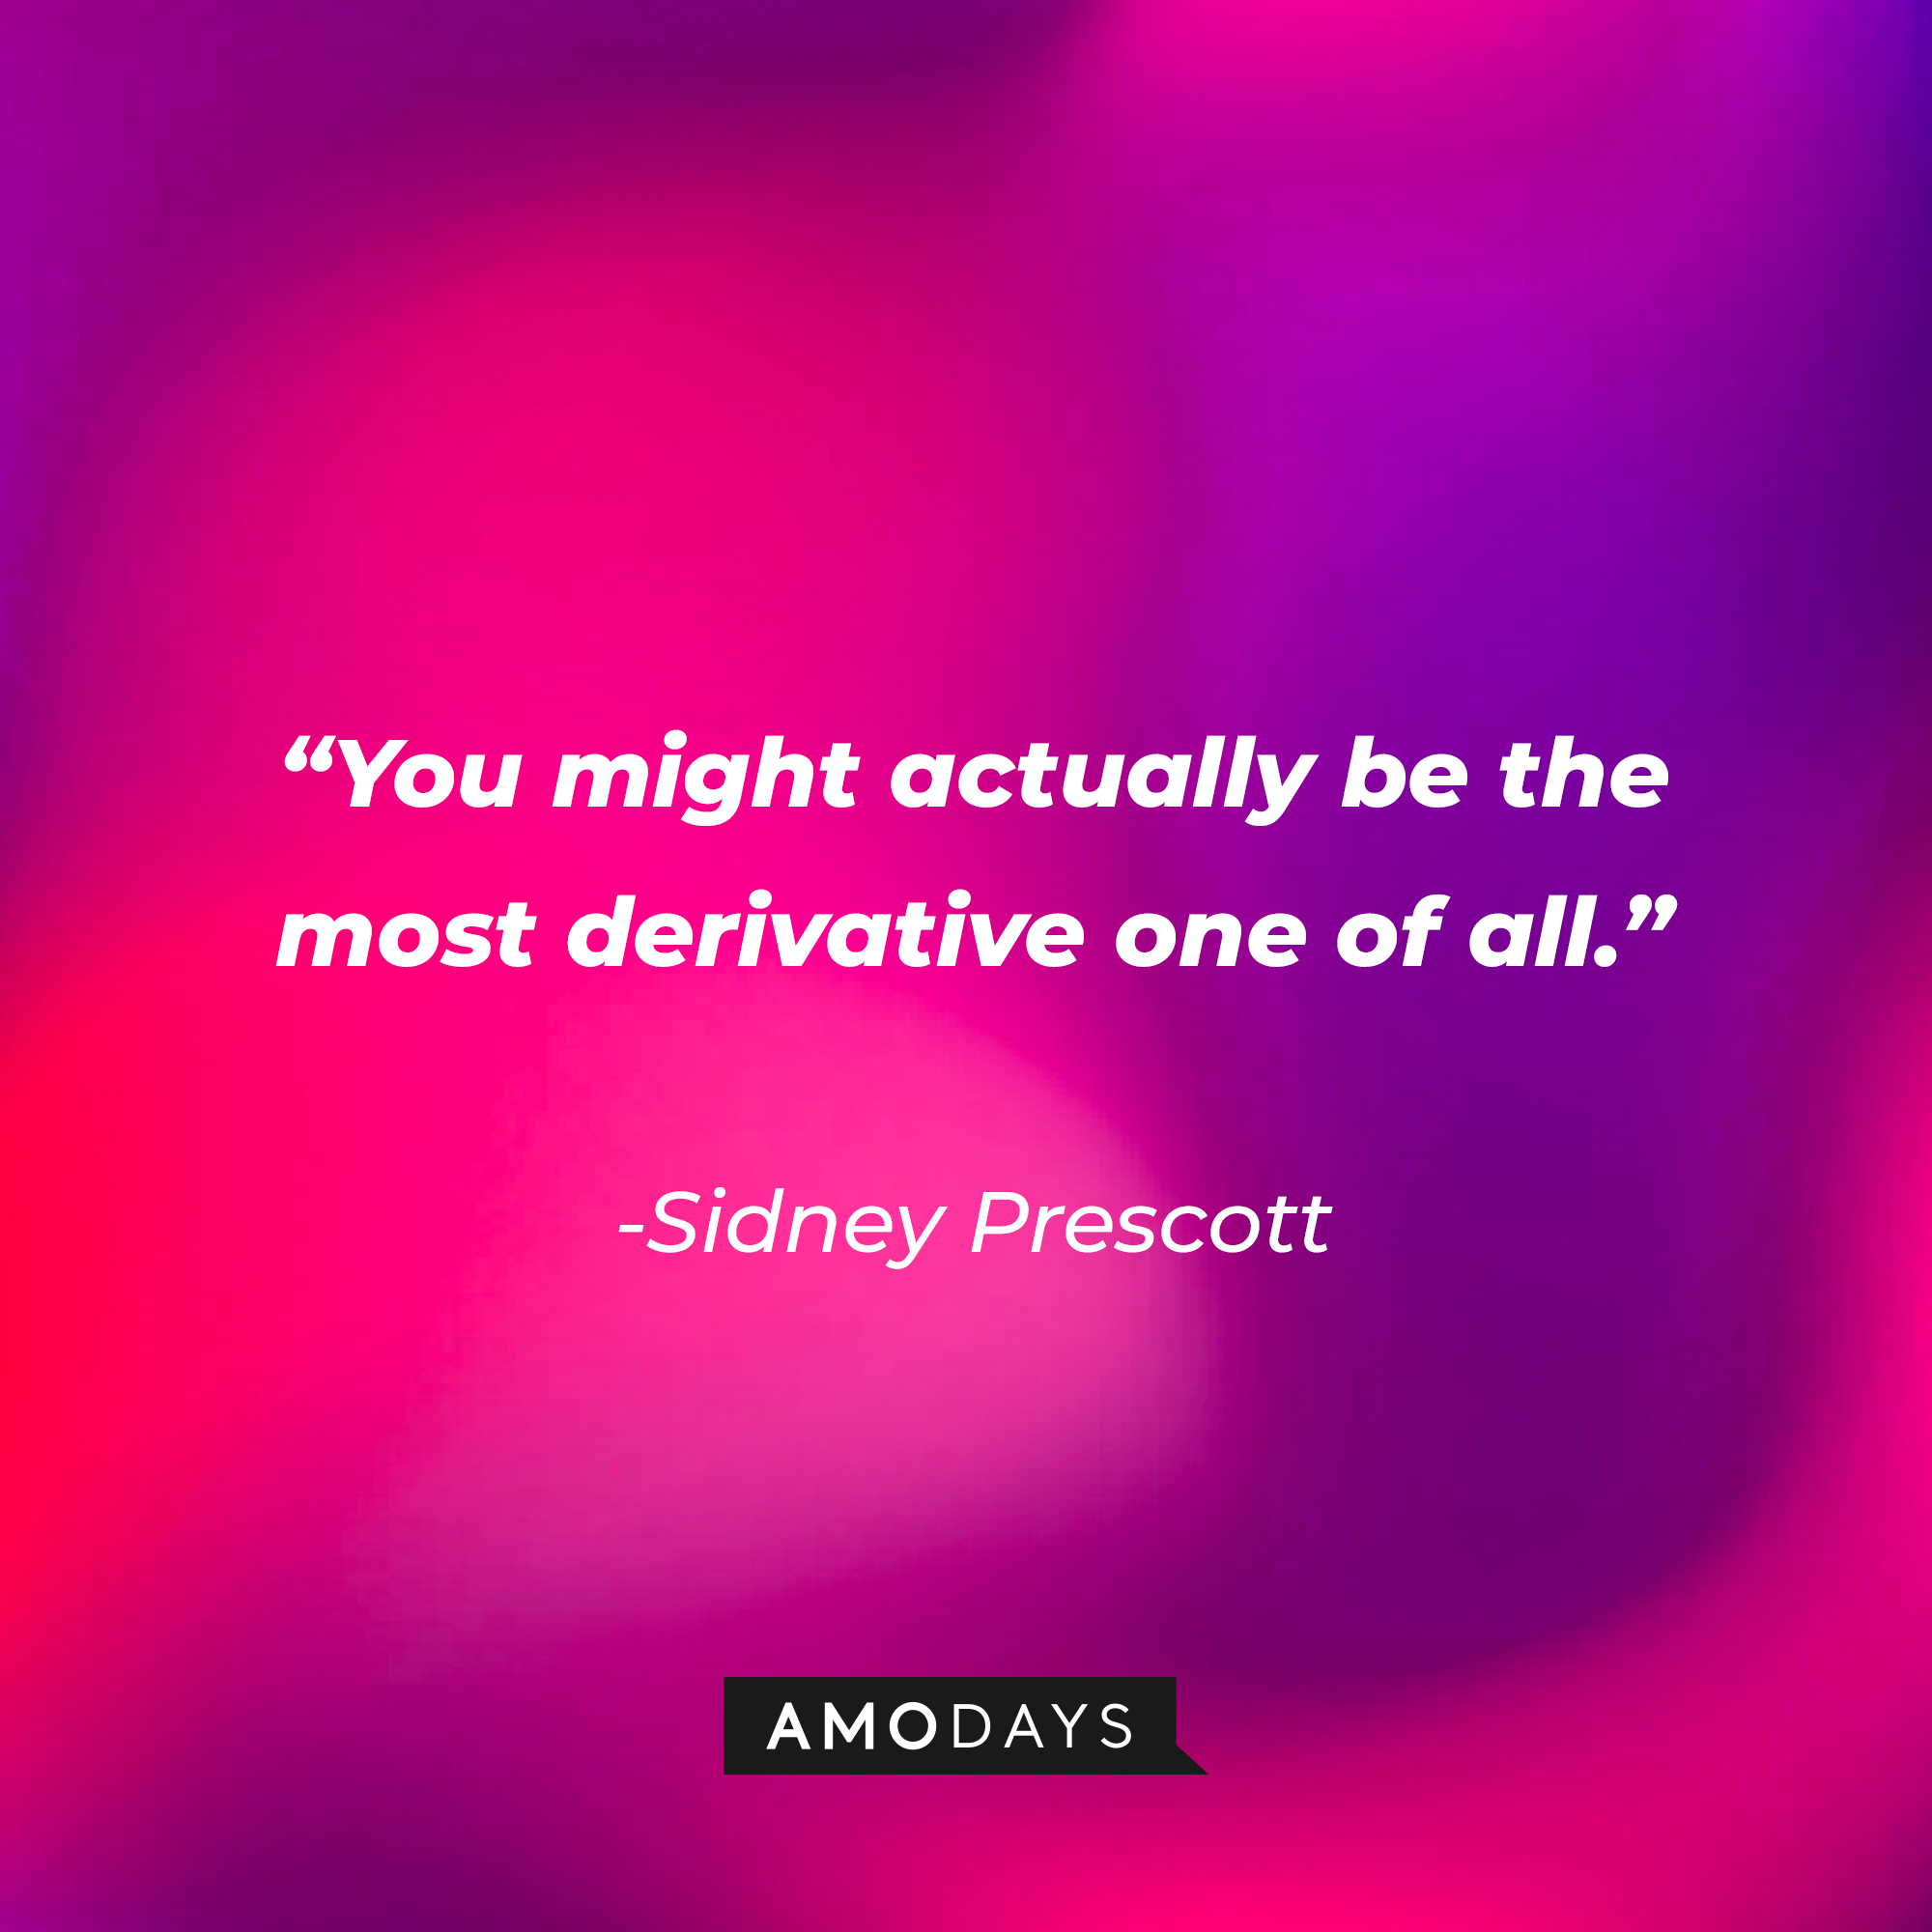 Sidney Prescott’s quote from “Scream ‘(2020)’”: "You might actually be the most derivative one of all." | Source: AmoDays